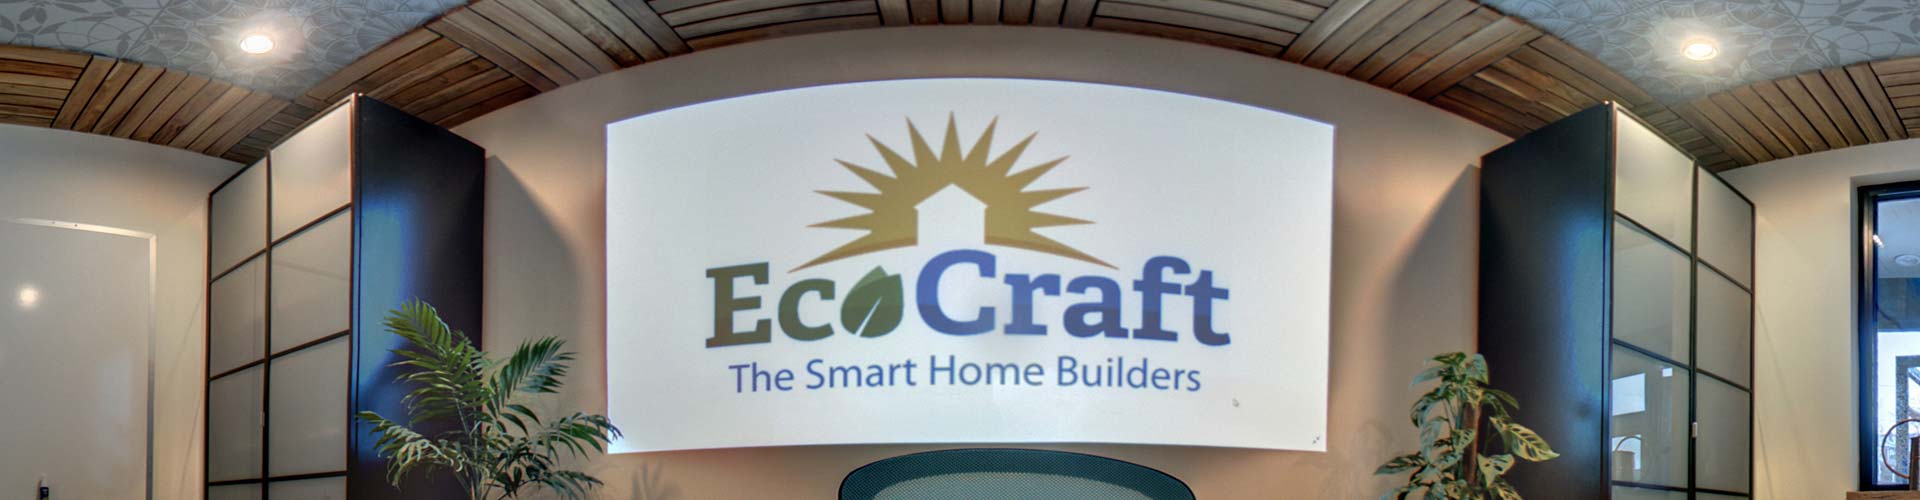 EcoCraft Homes - Pittsburgh New Home Builder